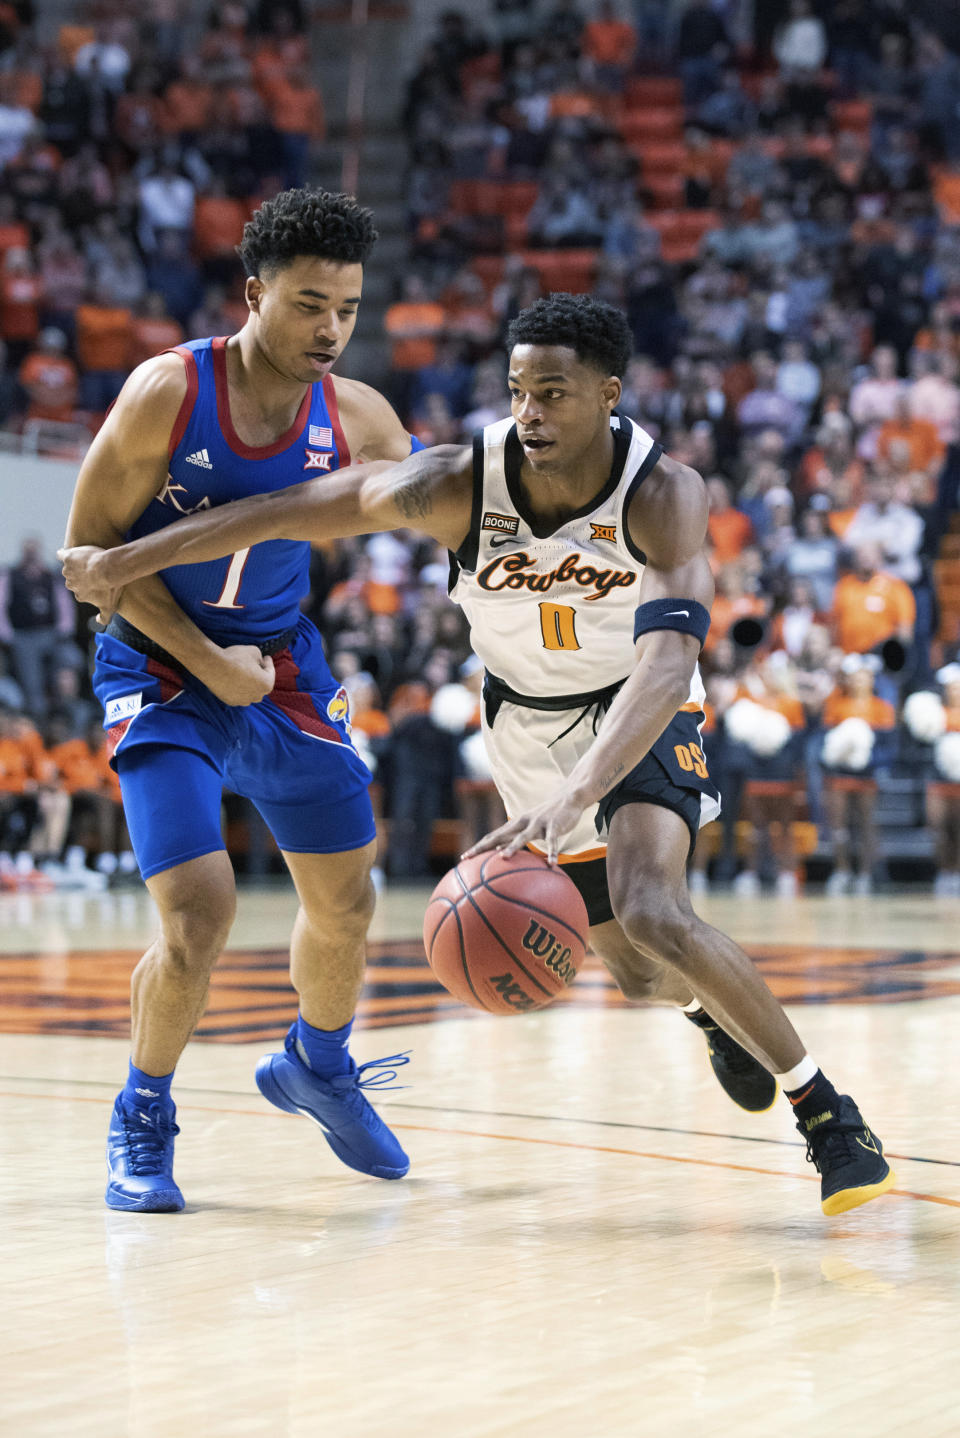 Oklahoma State guard Avery Anderson III (0) drives past Kansas guard Devon Dotson (1) during the first half of an NCAA college basketball game in Stillwater, Okla., Monday, Jan. 27, 2020. (AP Photo/Brody Schmidt)